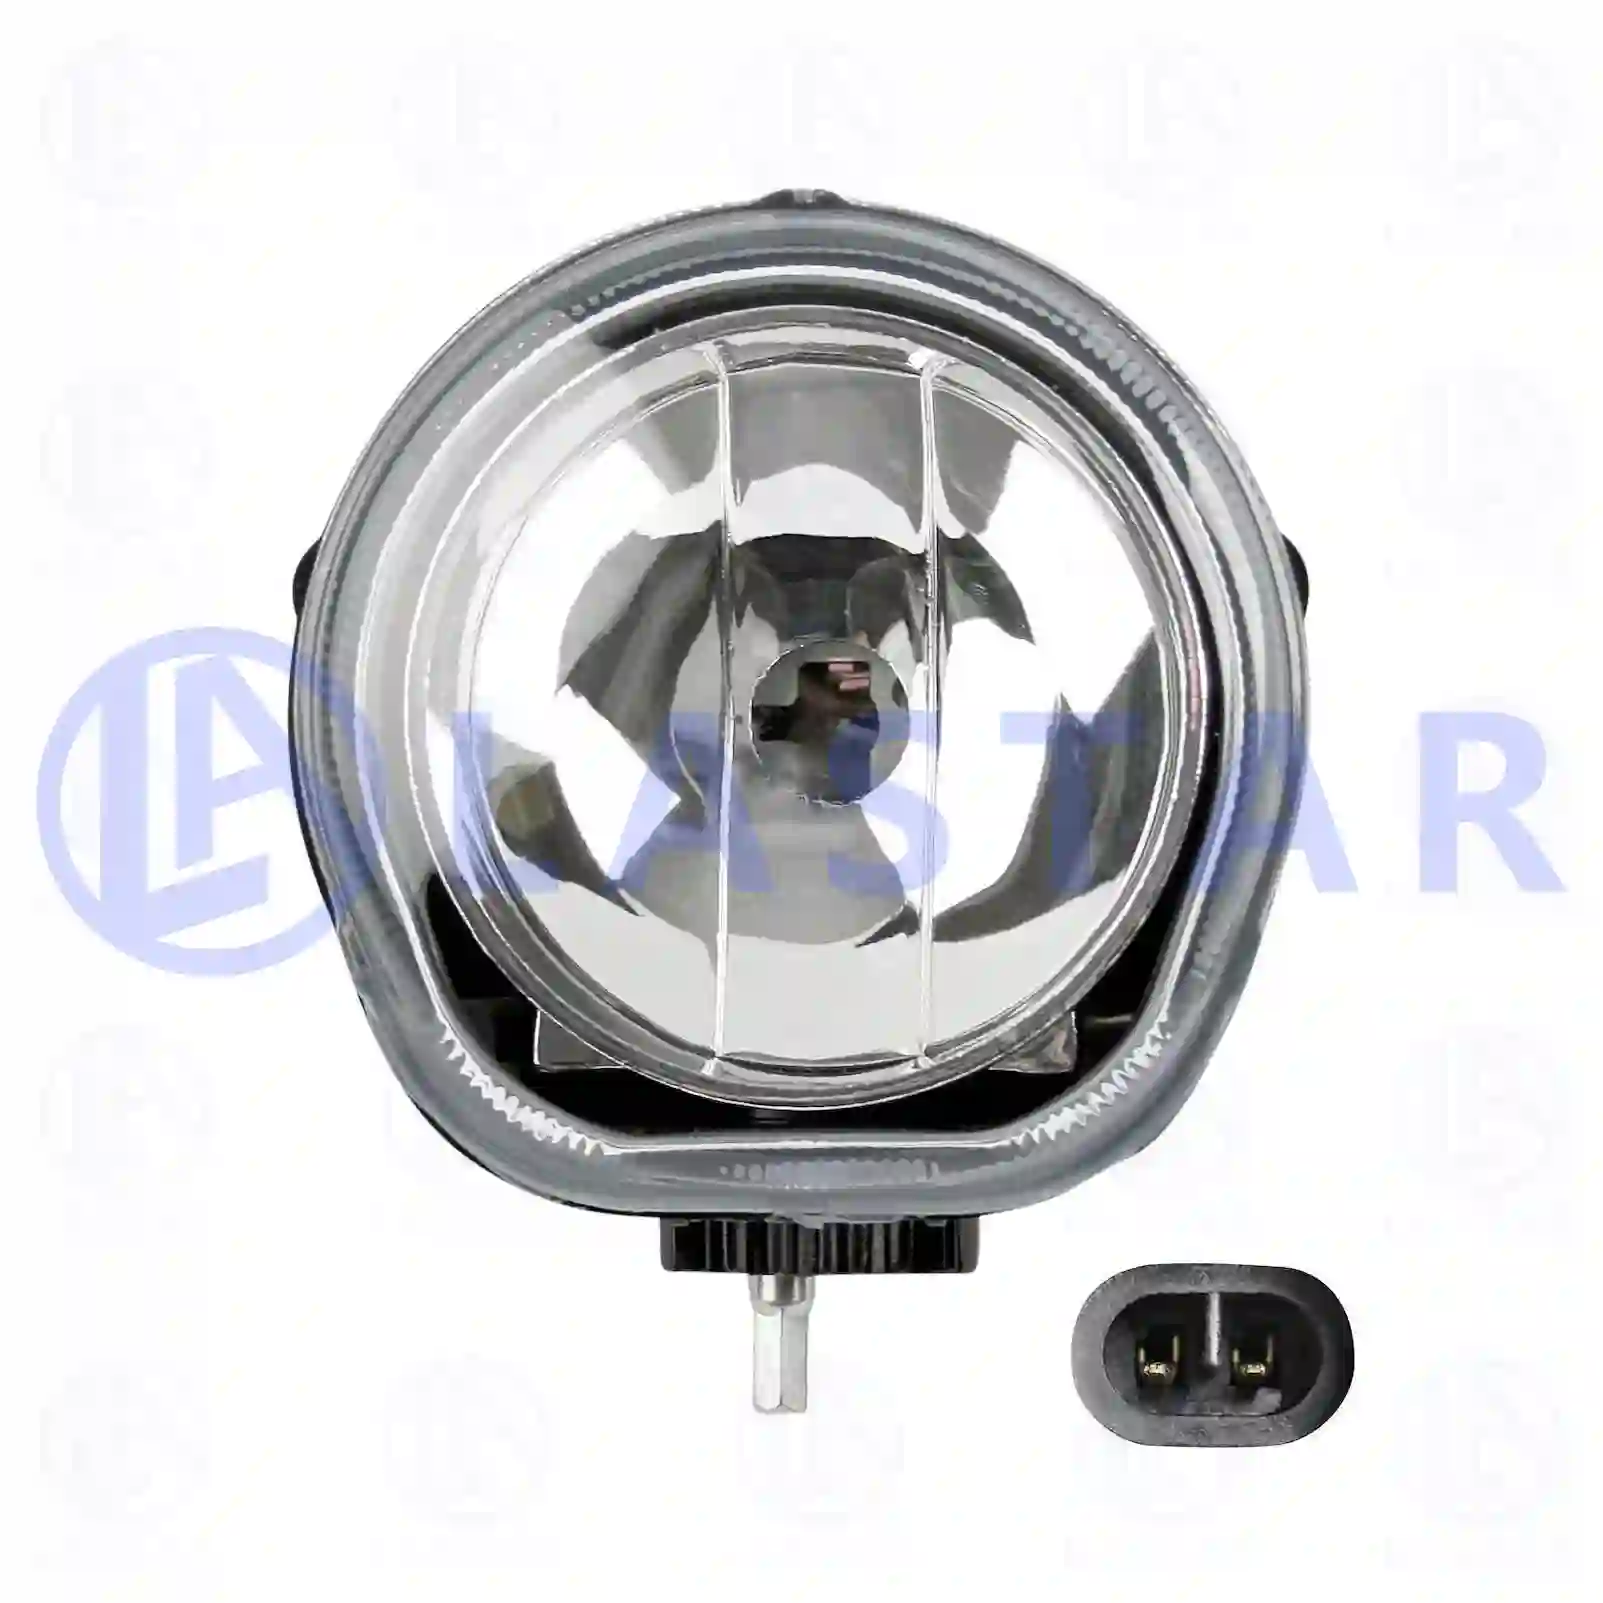 High beam lamp, without bulb, 77712647, 504181096, ZG20552-0008 ||  77712647 Lastar Spare Part | Truck Spare Parts, Auotomotive Spare Parts High beam lamp, without bulb, 77712647, 504181096, ZG20552-0008 ||  77712647 Lastar Spare Part | Truck Spare Parts, Auotomotive Spare Parts